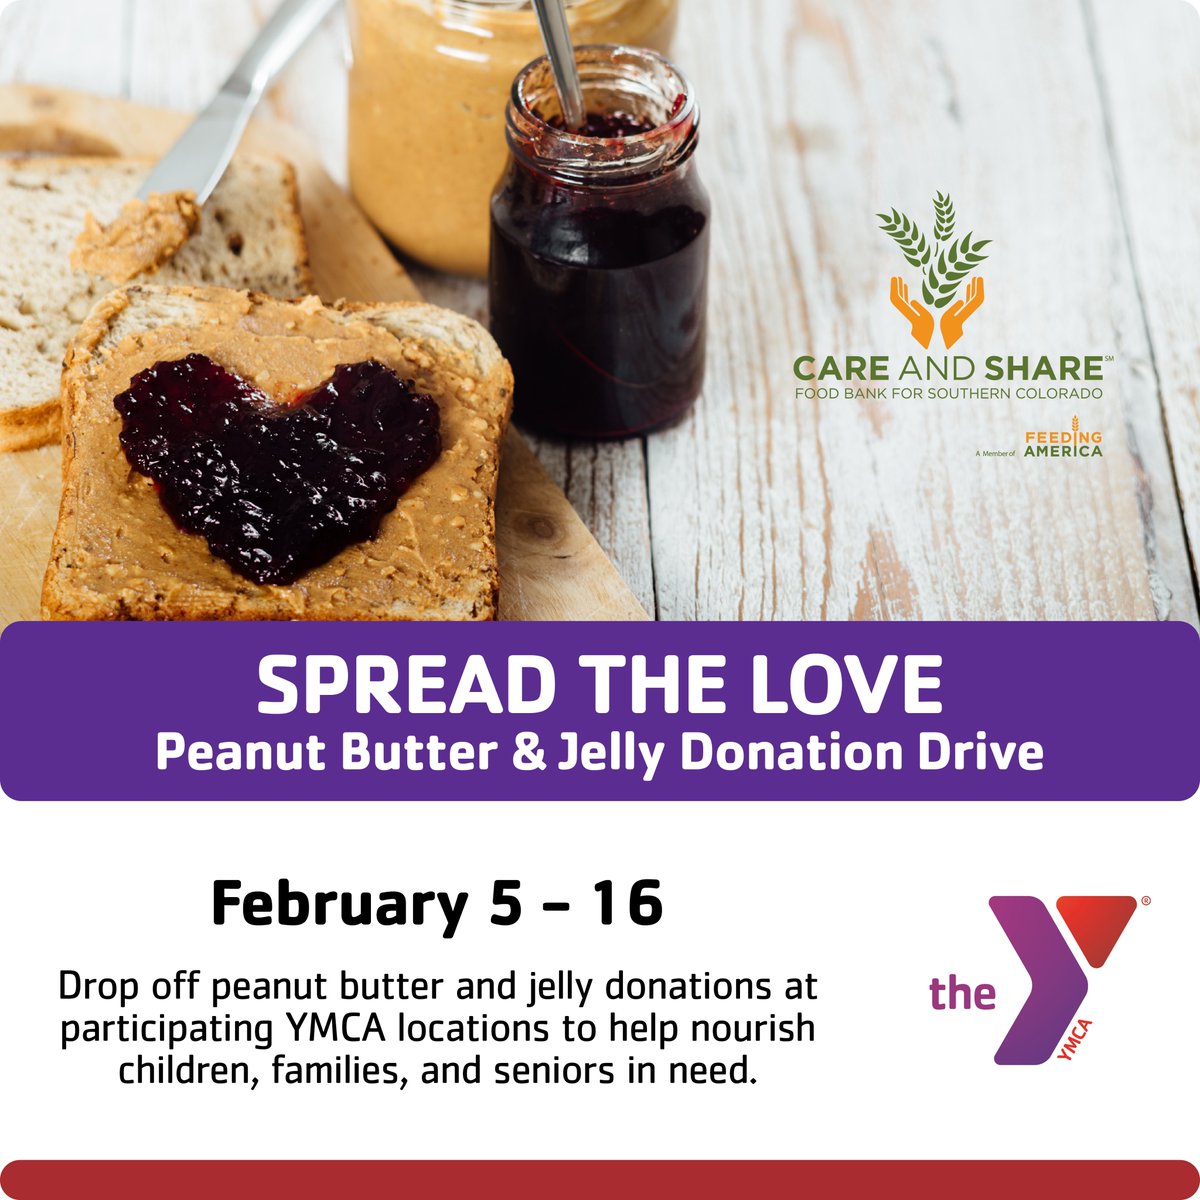 Help Spread the LOVE! We are partnering with @CareandShareFB for their Peanut Butter & Jelly Donation Drive from Feb 5 - 16th drop off peanut butter and jelly donations at participating YMCA locations to help nourish children, families, and seniors in need!